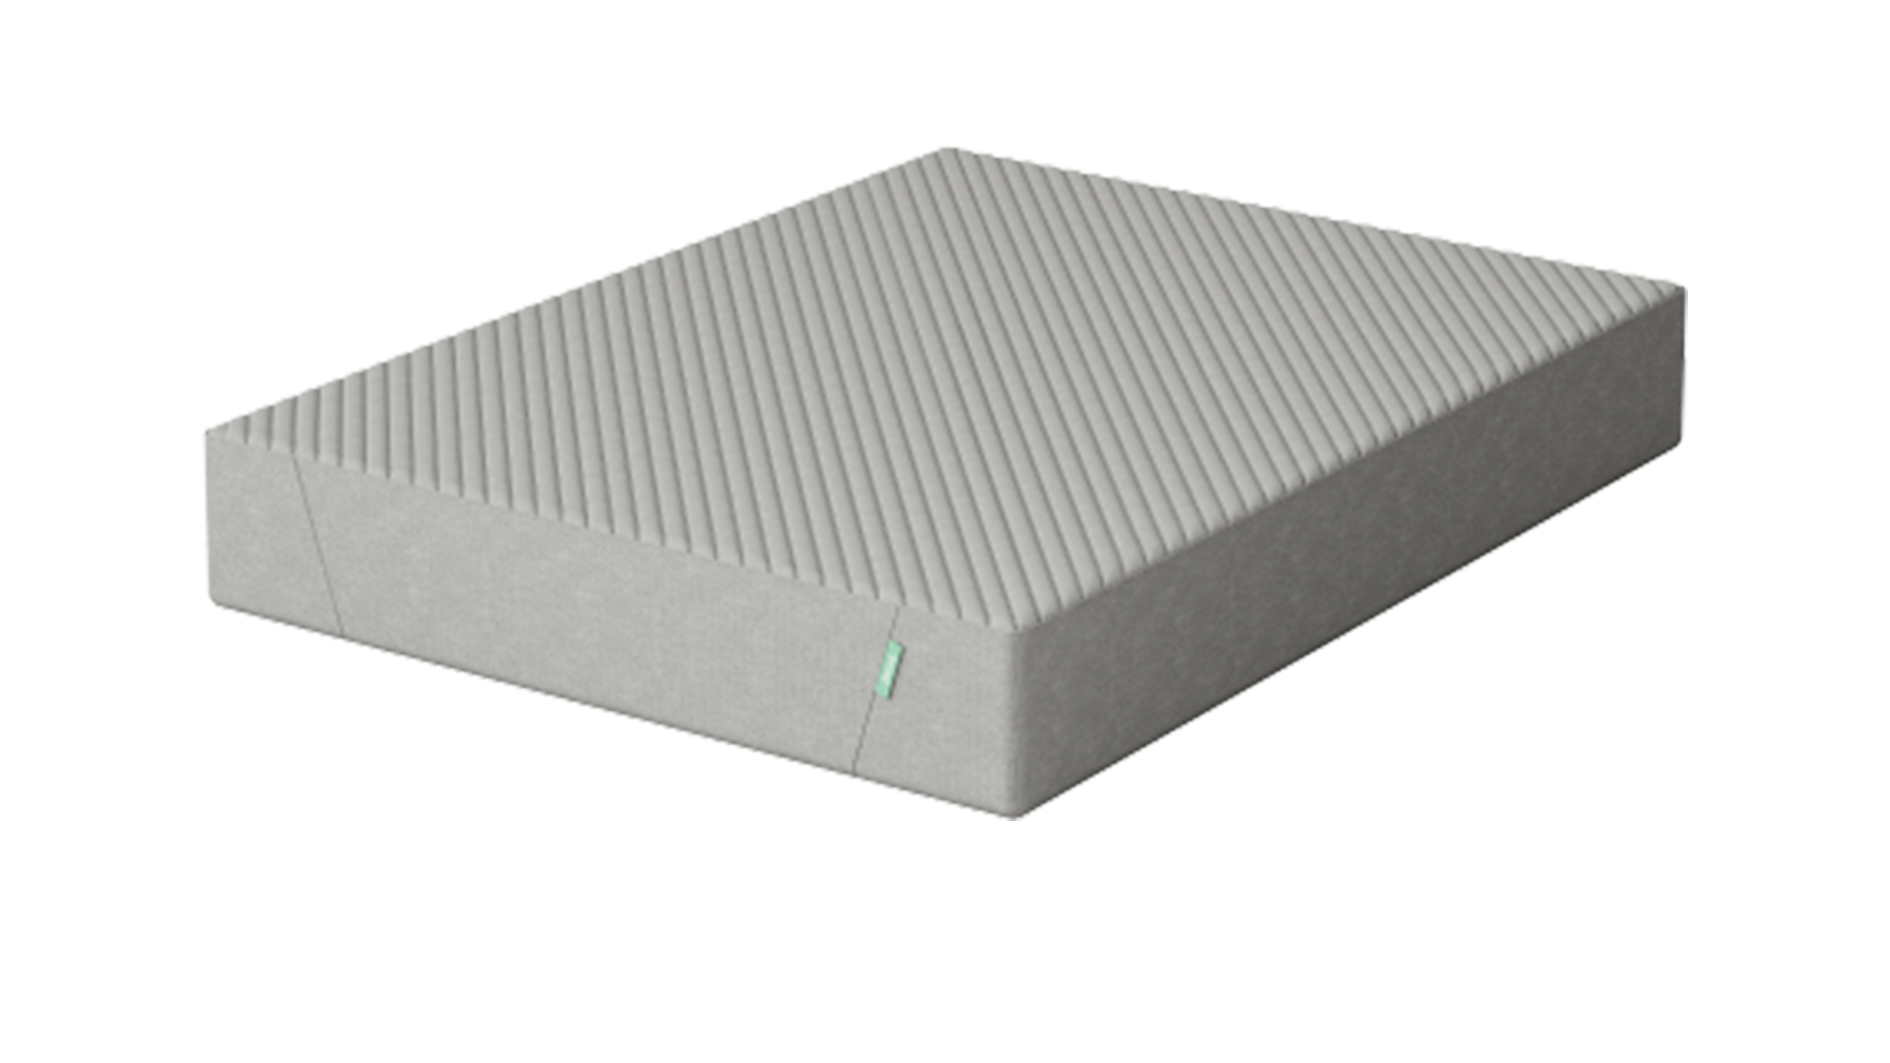 The Siena Memory Foam Mattress in gray shown at an angle